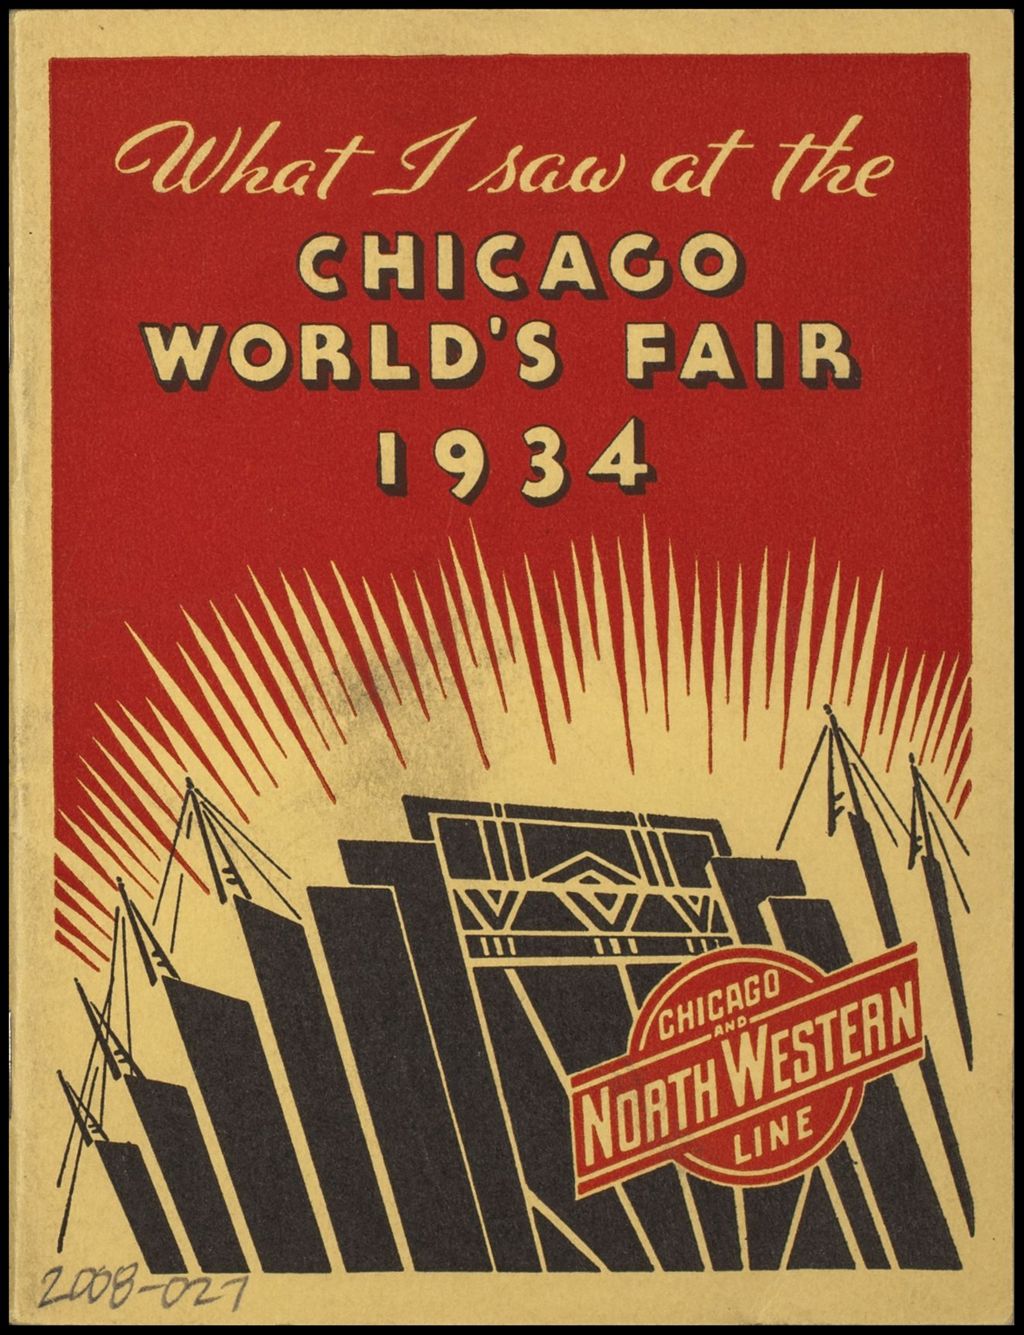 Souvenir "What I Saw at the Chicago World's fair, 1934 booklet